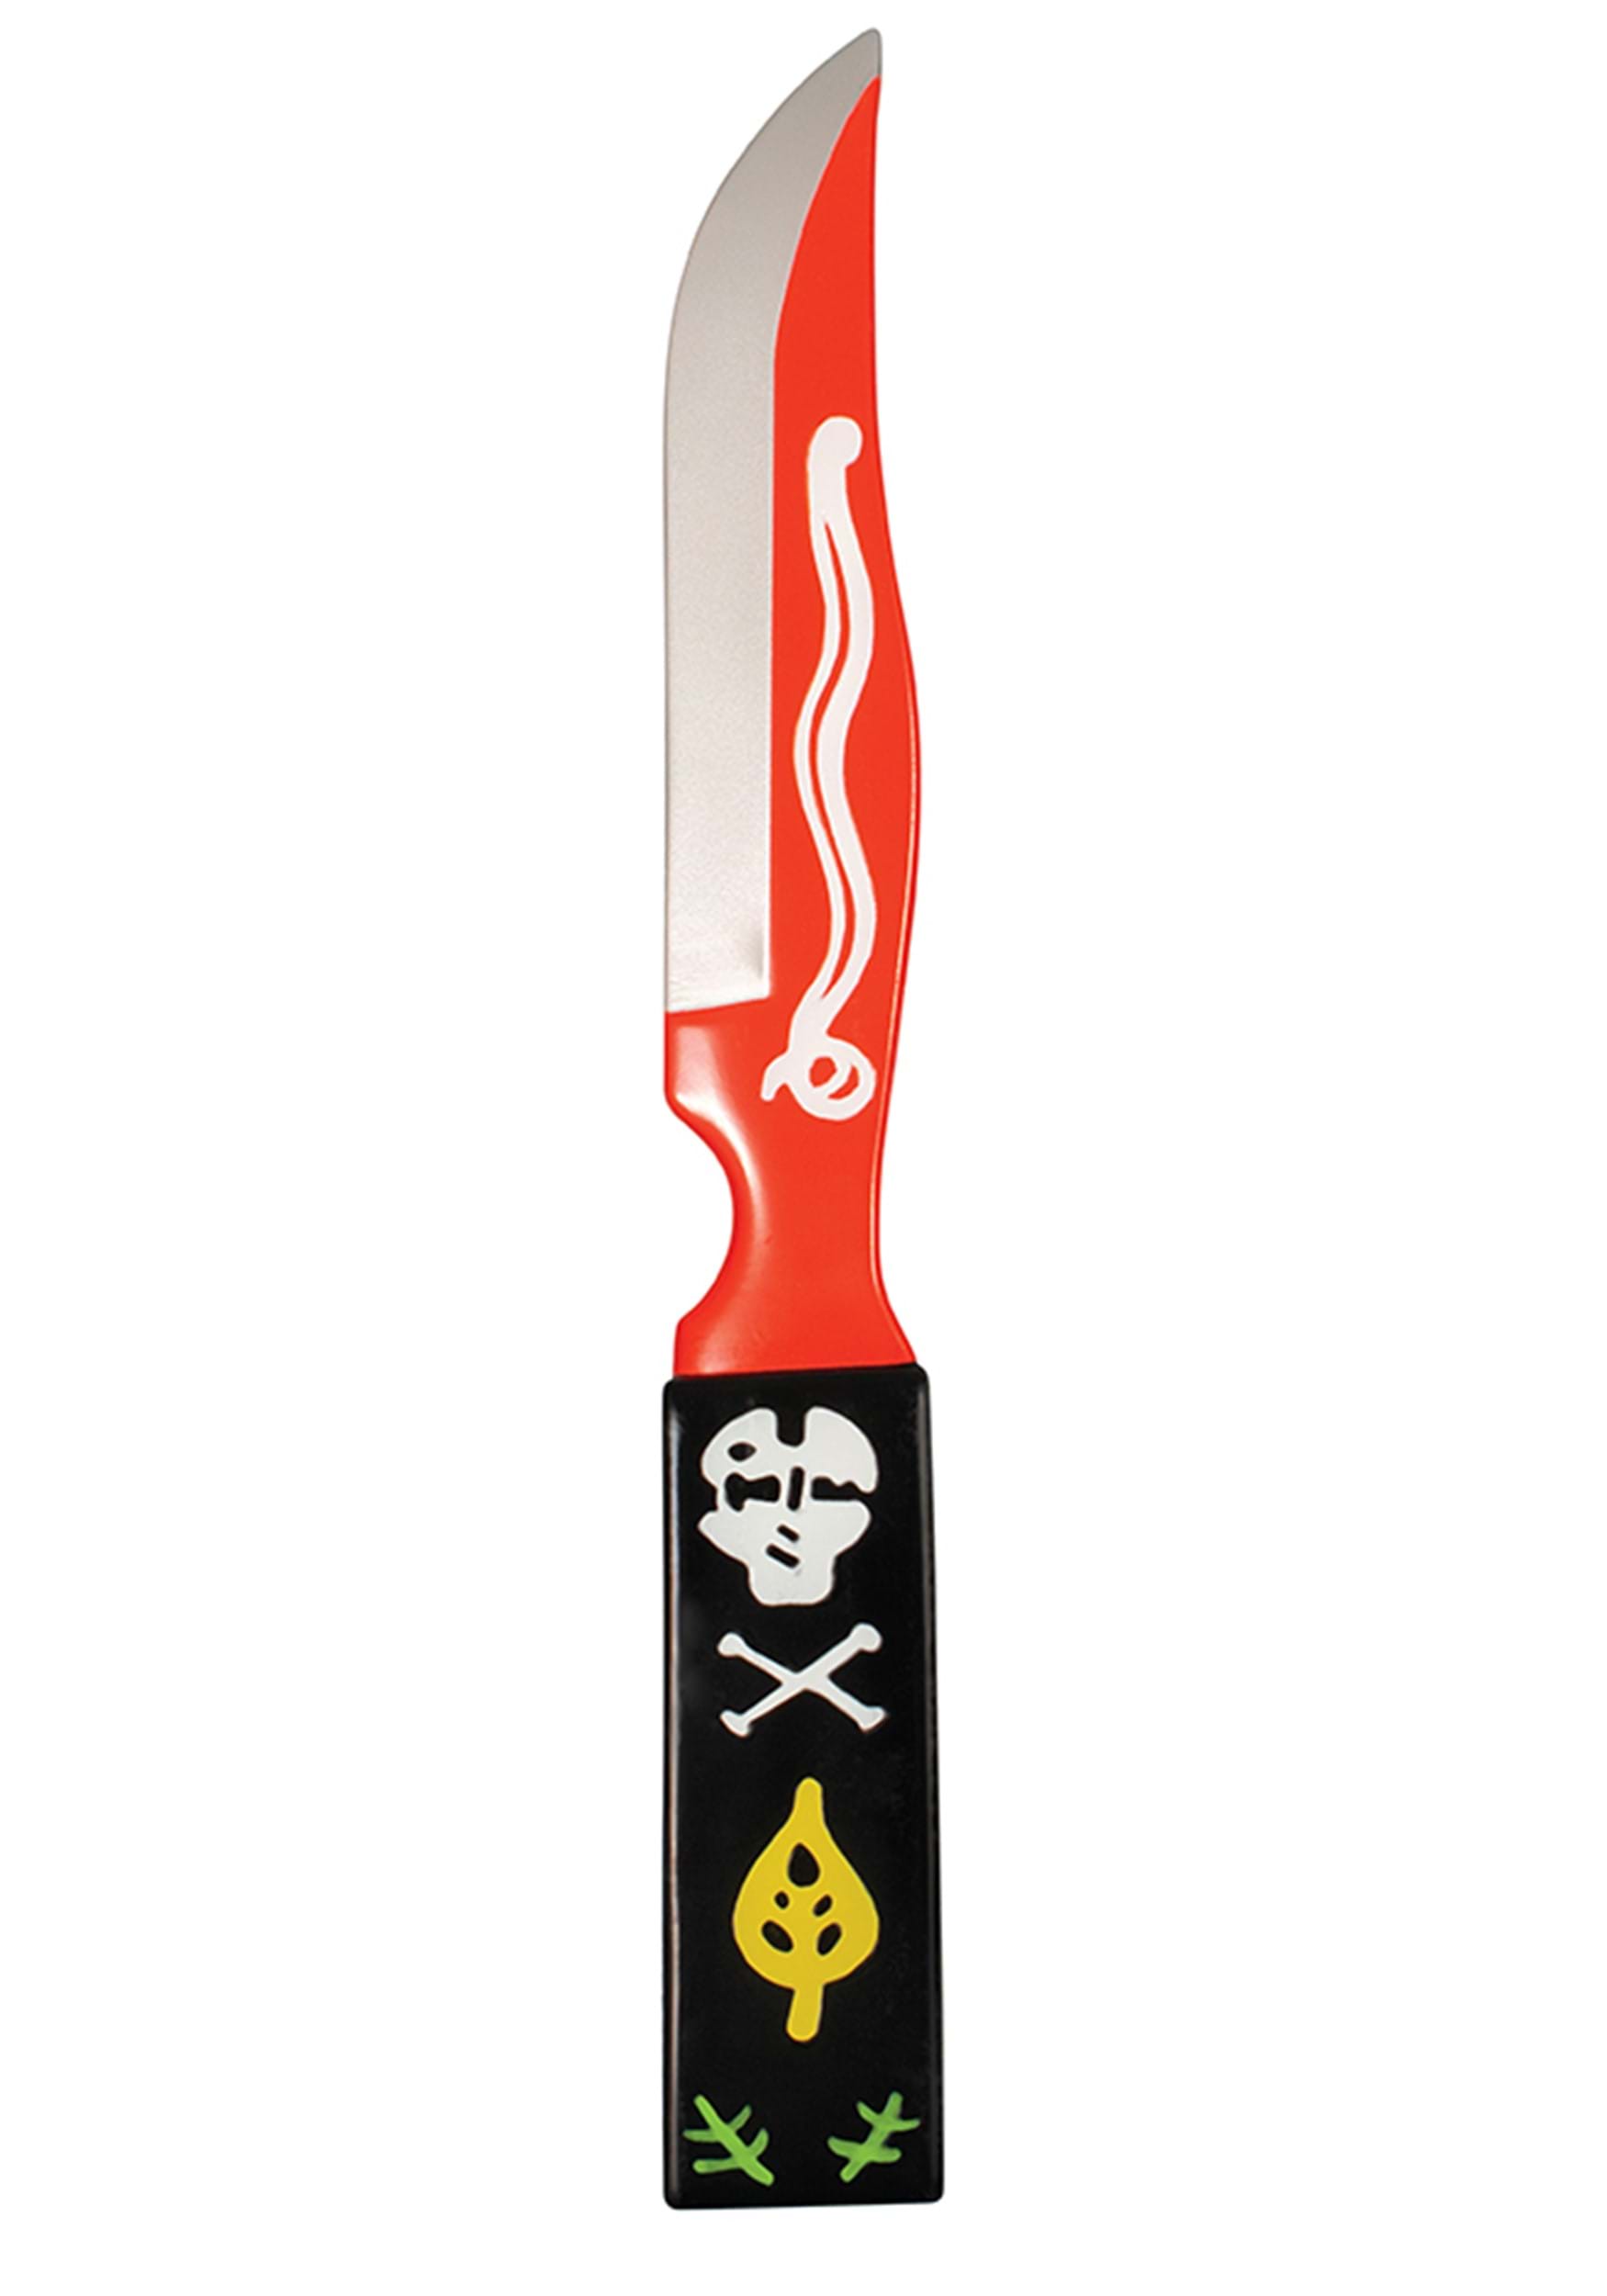 Chucky Child's Play Voodoo Prop Knife